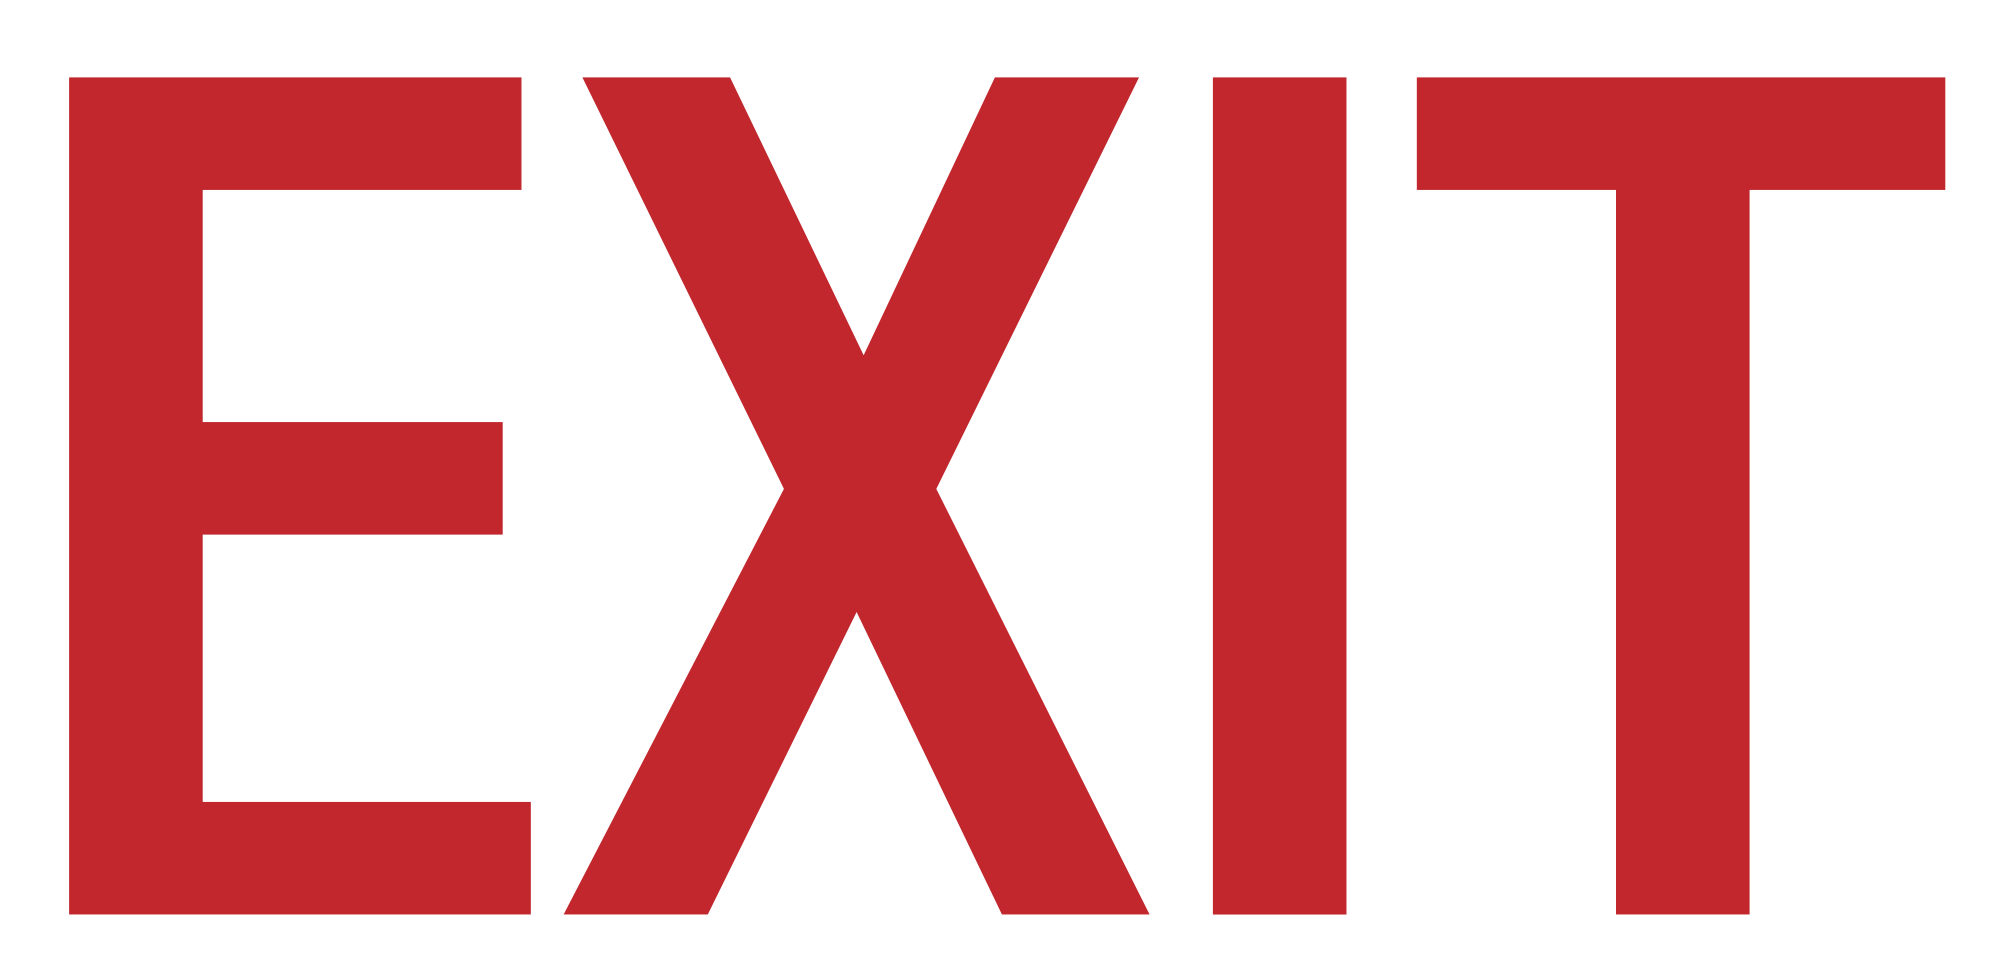 File:Exit sign text (red).svg - Wikimedia Commons